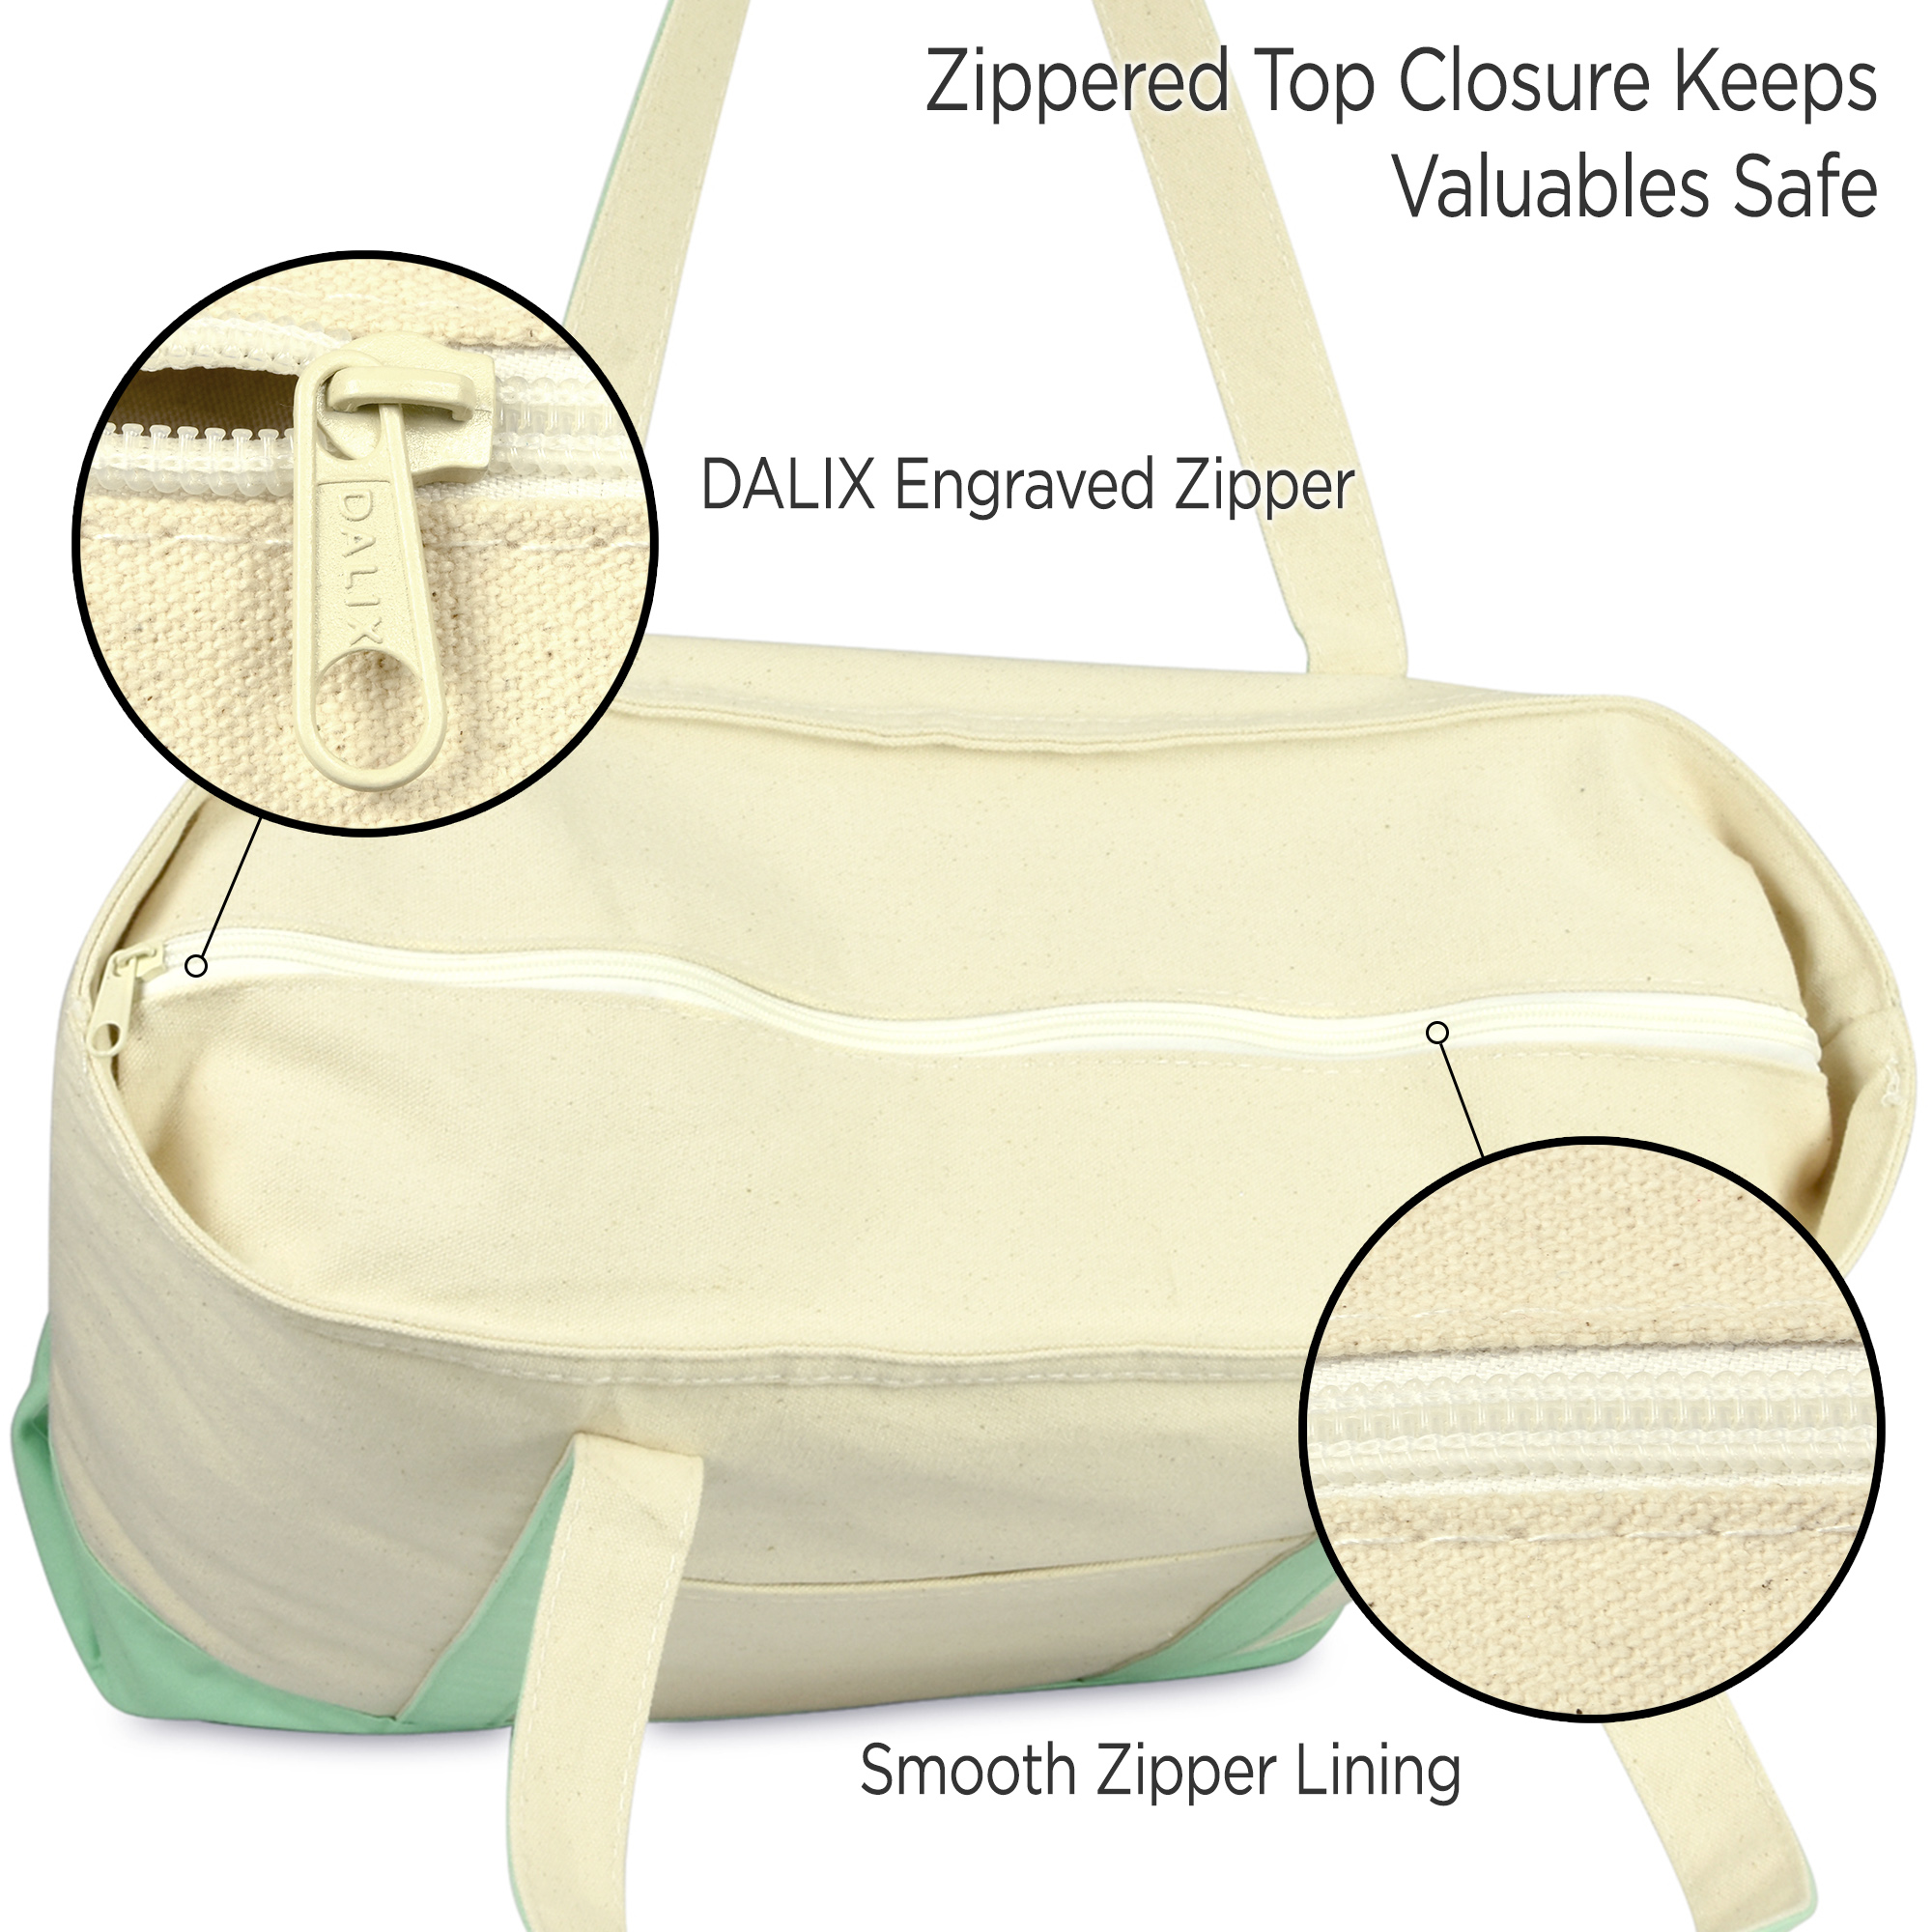 DALIX 22" Extra Large Cotton Canvas Zippered Shopping Tote Grocery Bag in Mint Green - image 4 of 6